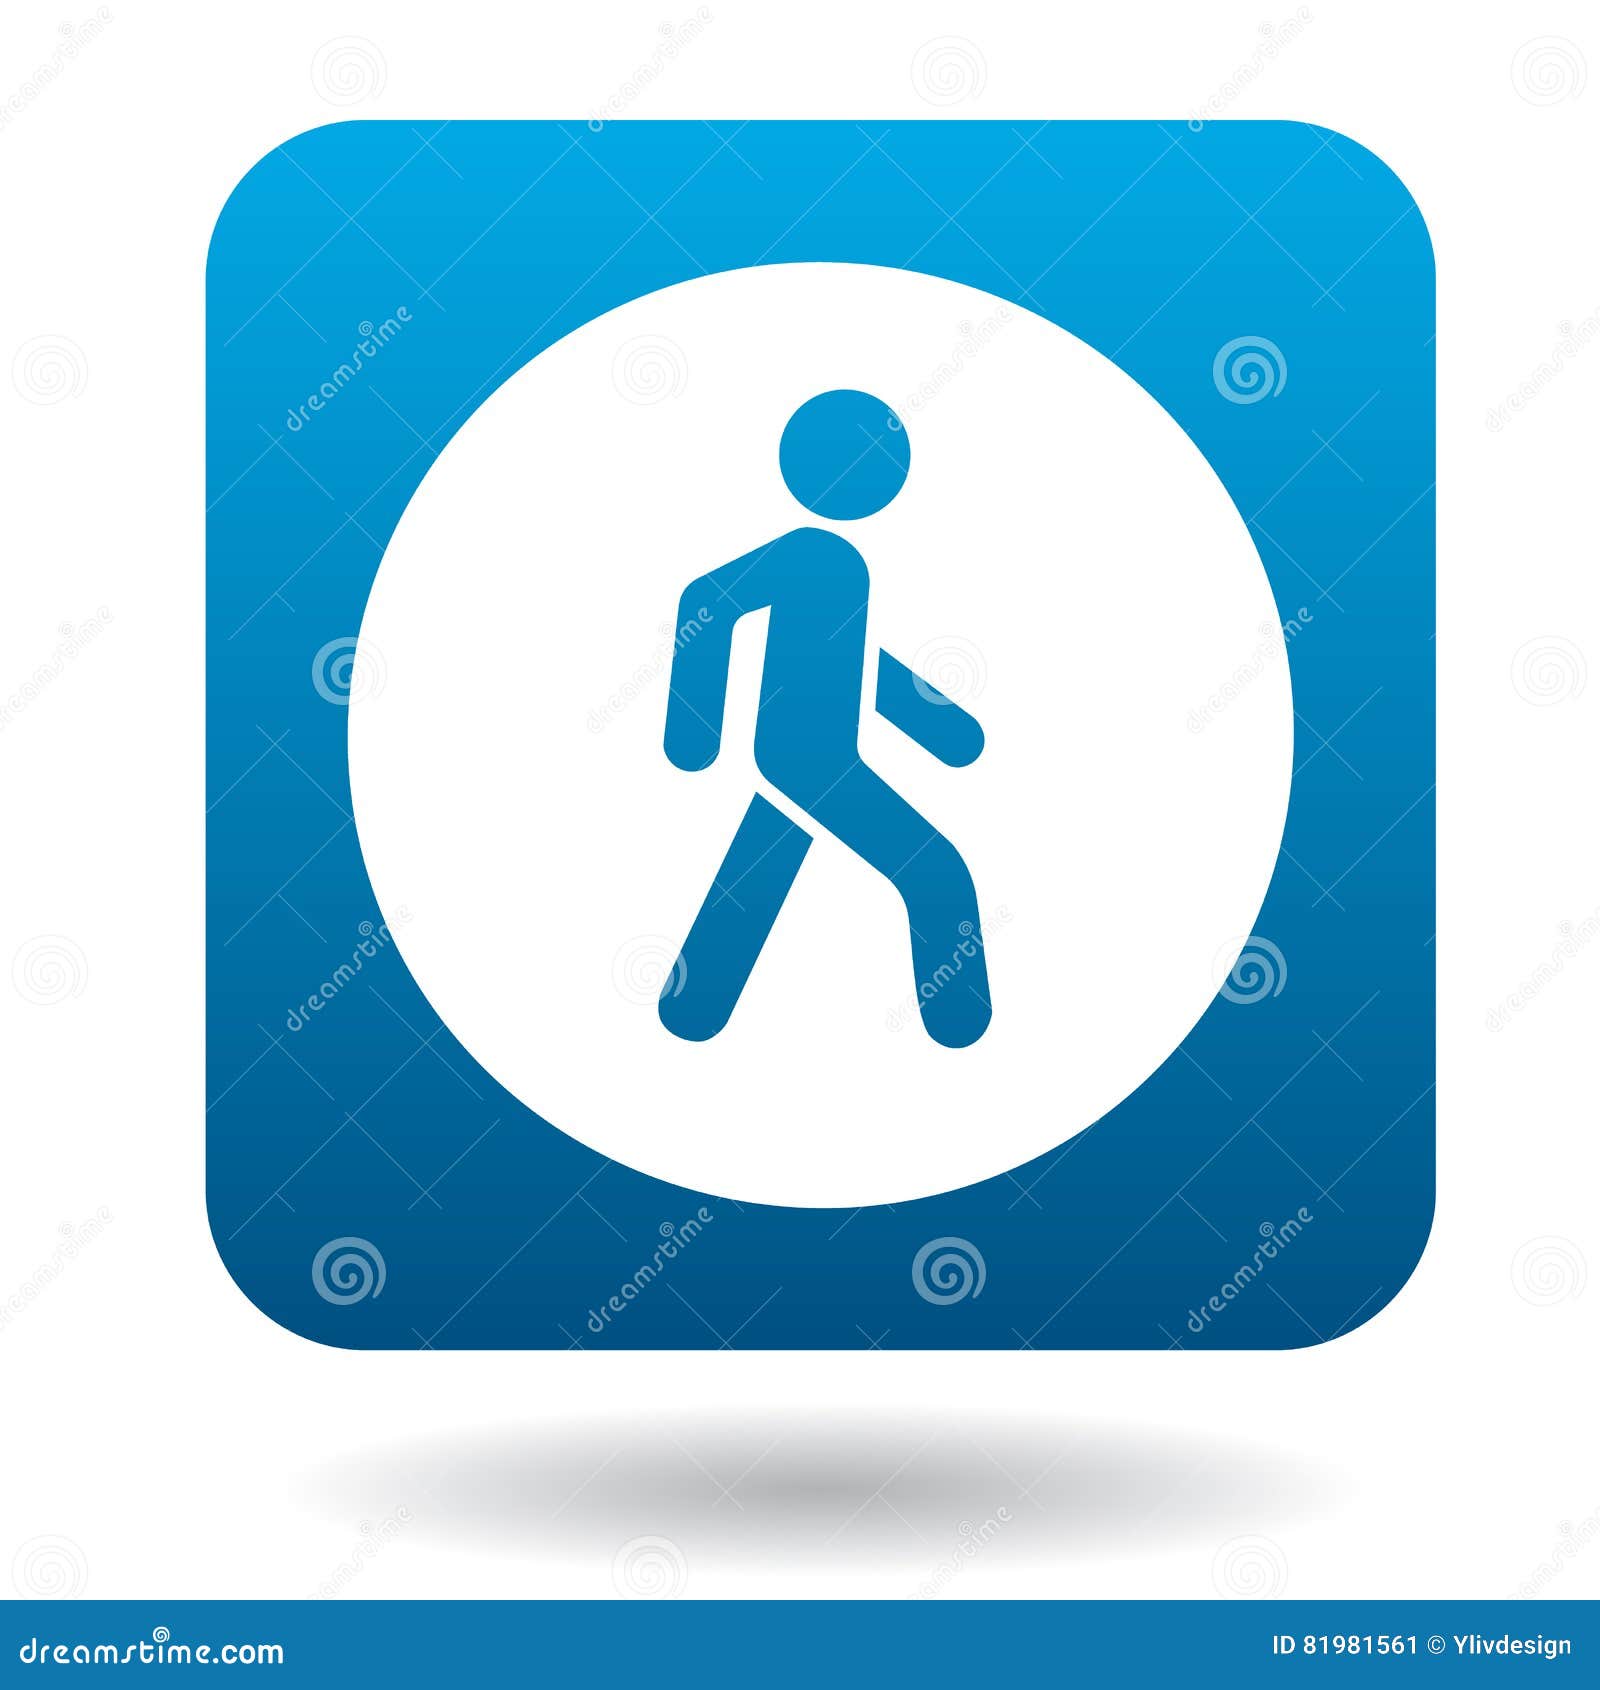 man on a pedestrian crossing icon, simple style